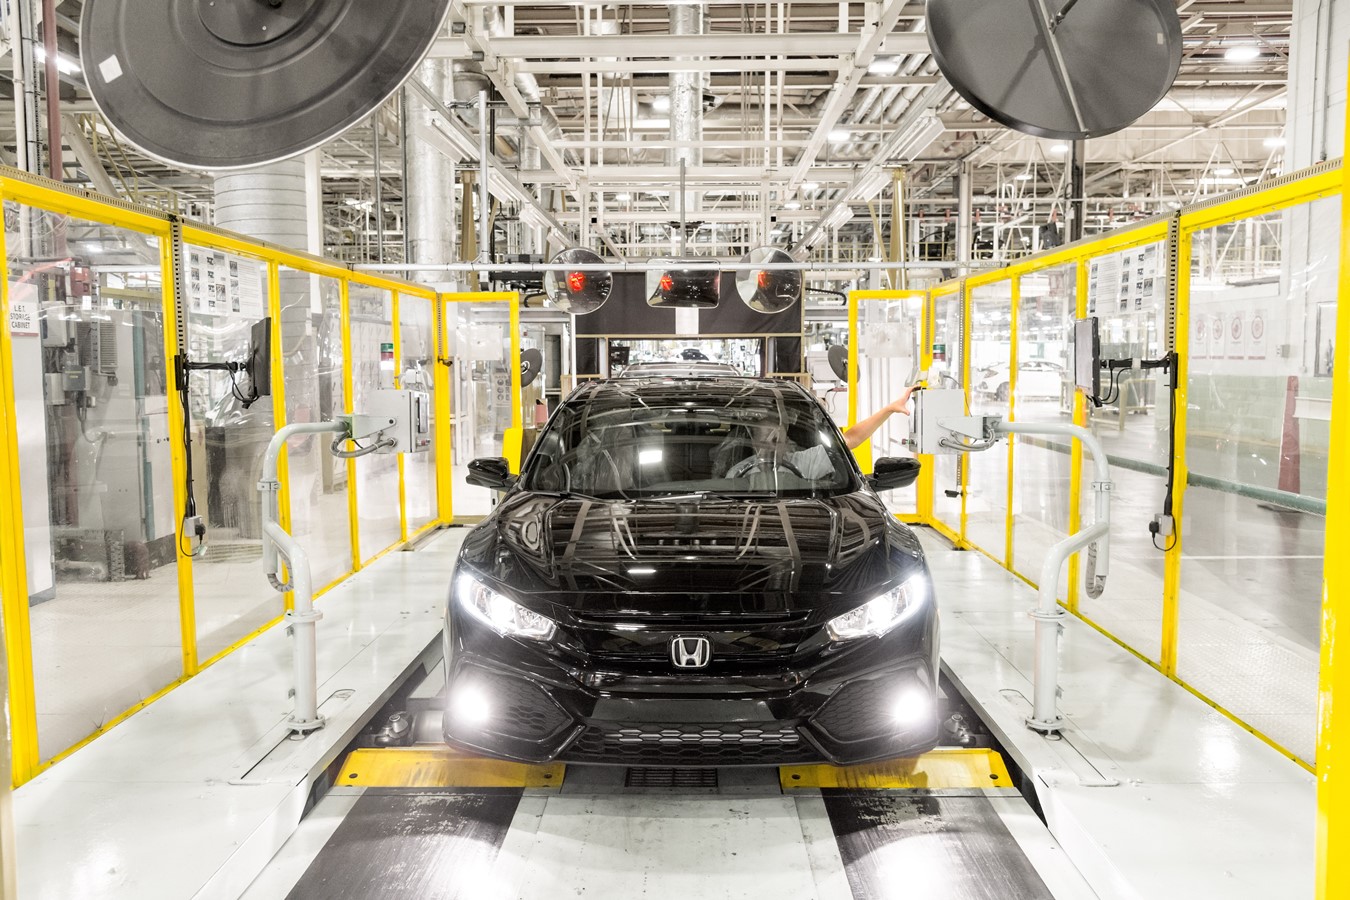  Honda announces proposal to cease production at its Swindon factory in 2021